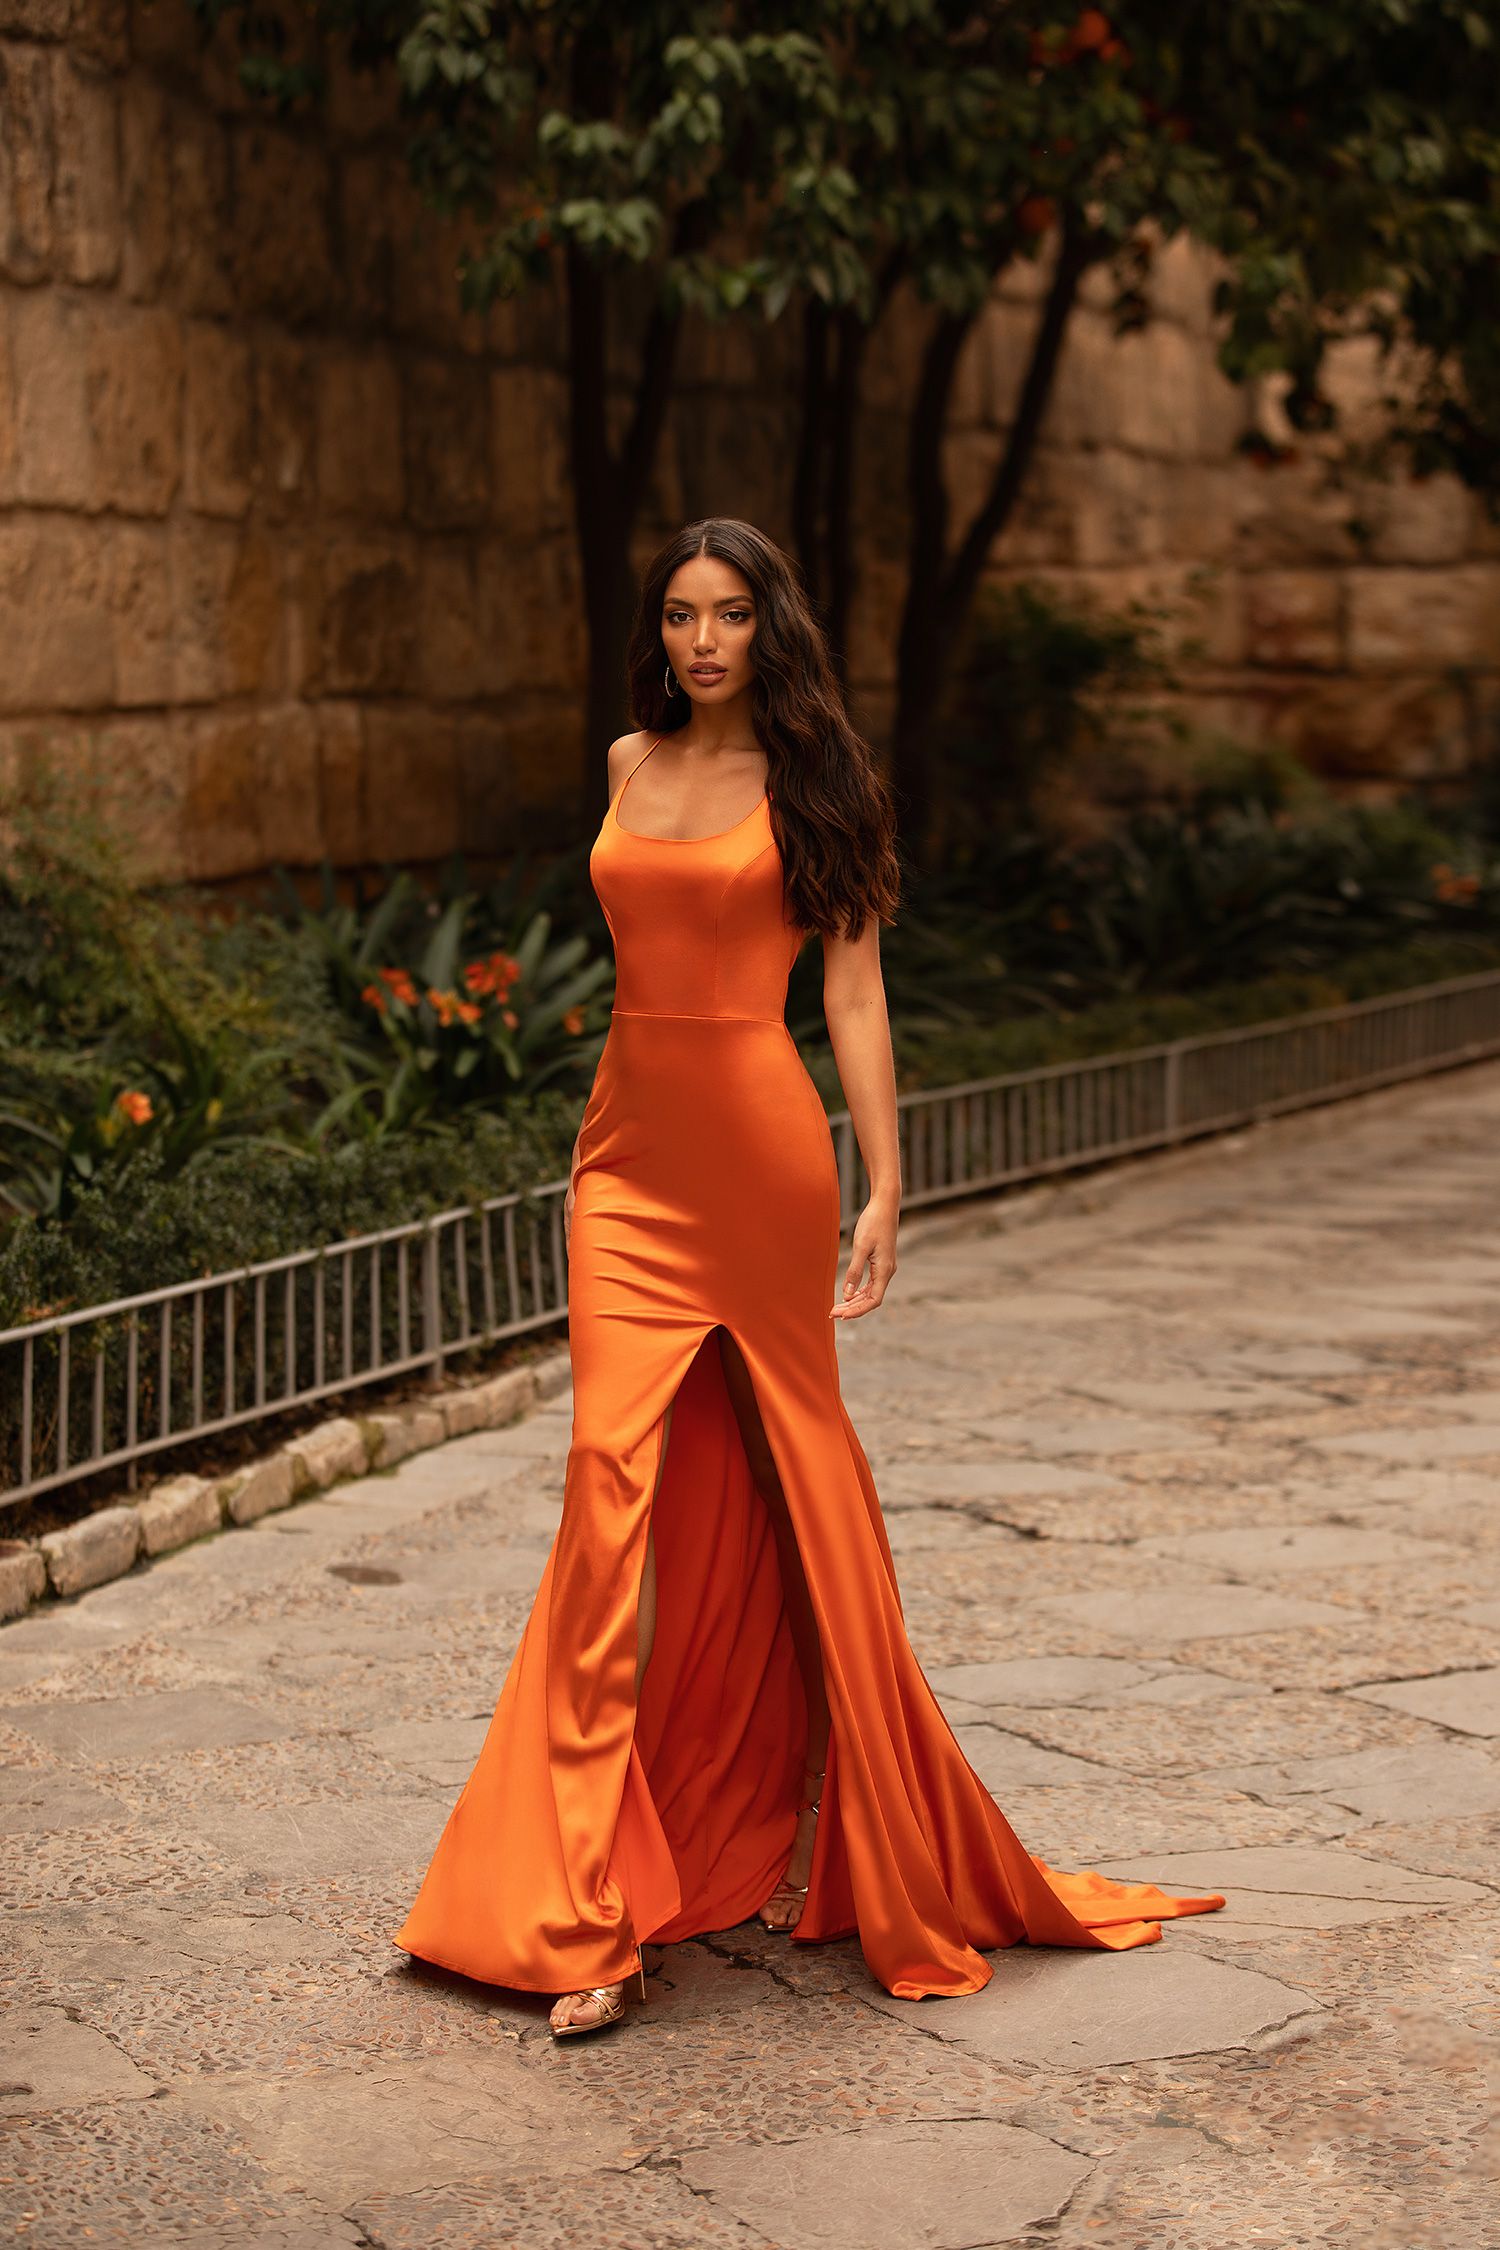 Orange Dresses: Gives Attractive Look To
Brides